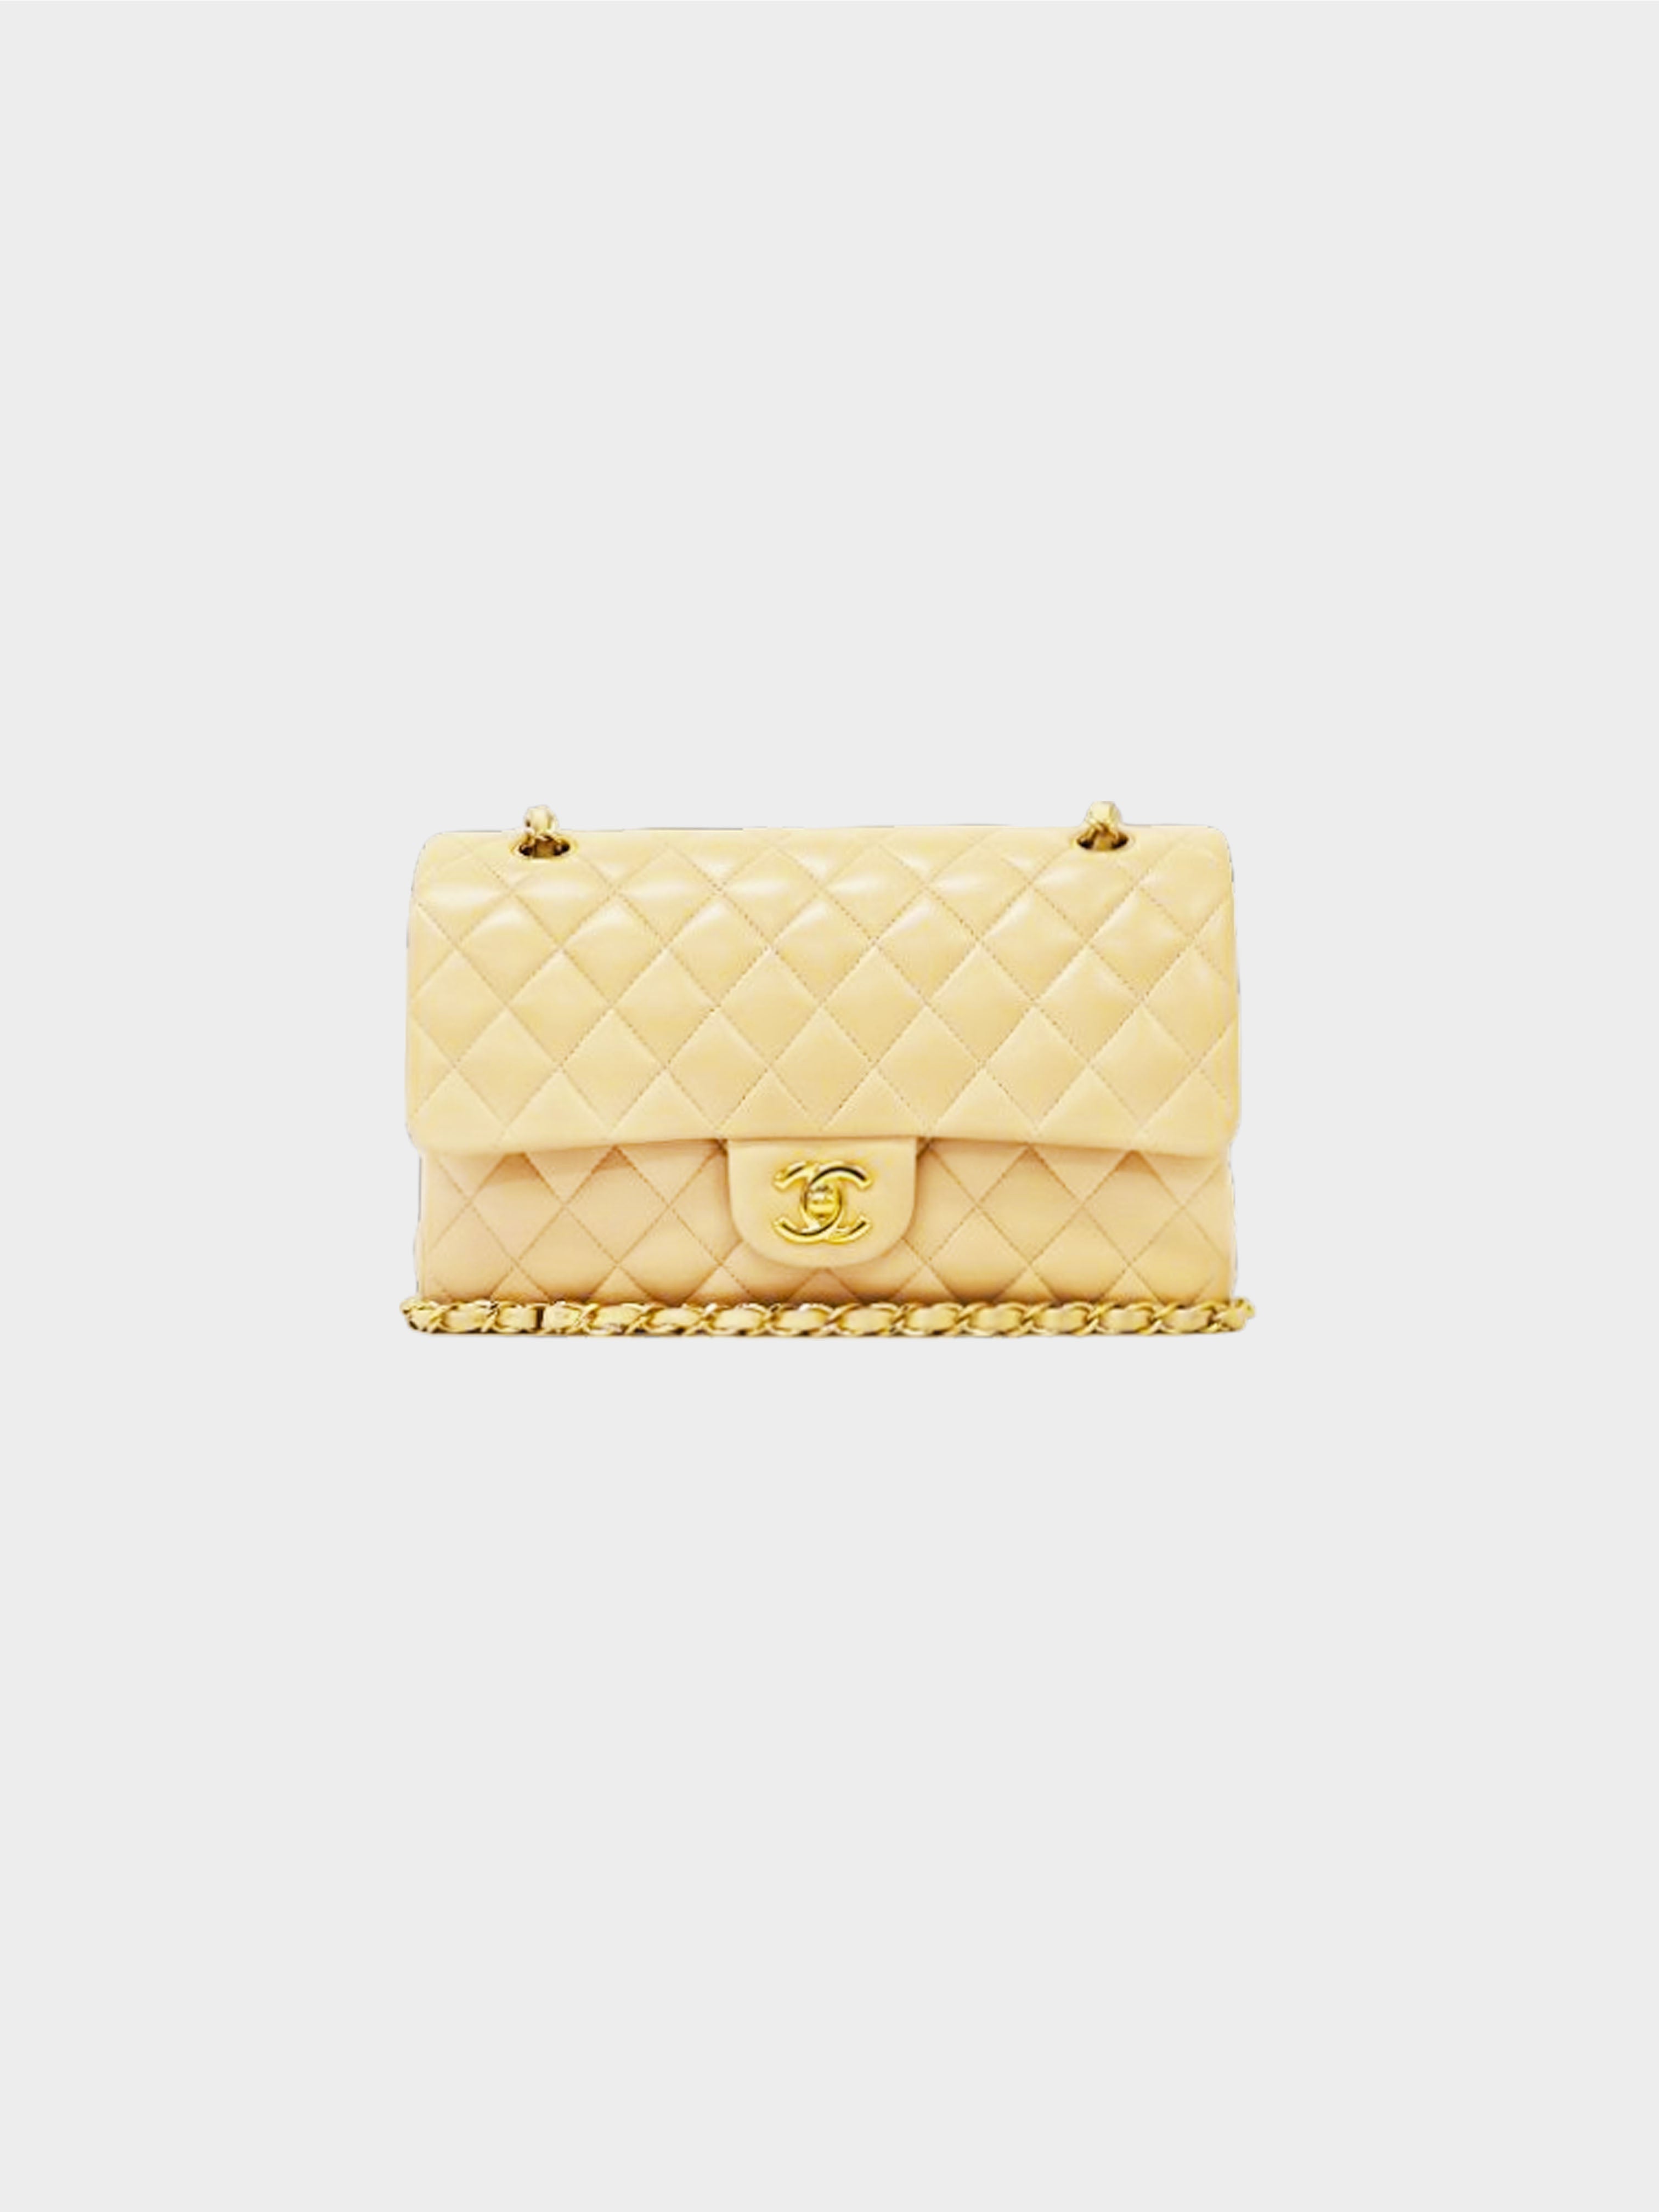 Chanel 2009 Beige Matelasse Quilted Flap Bag